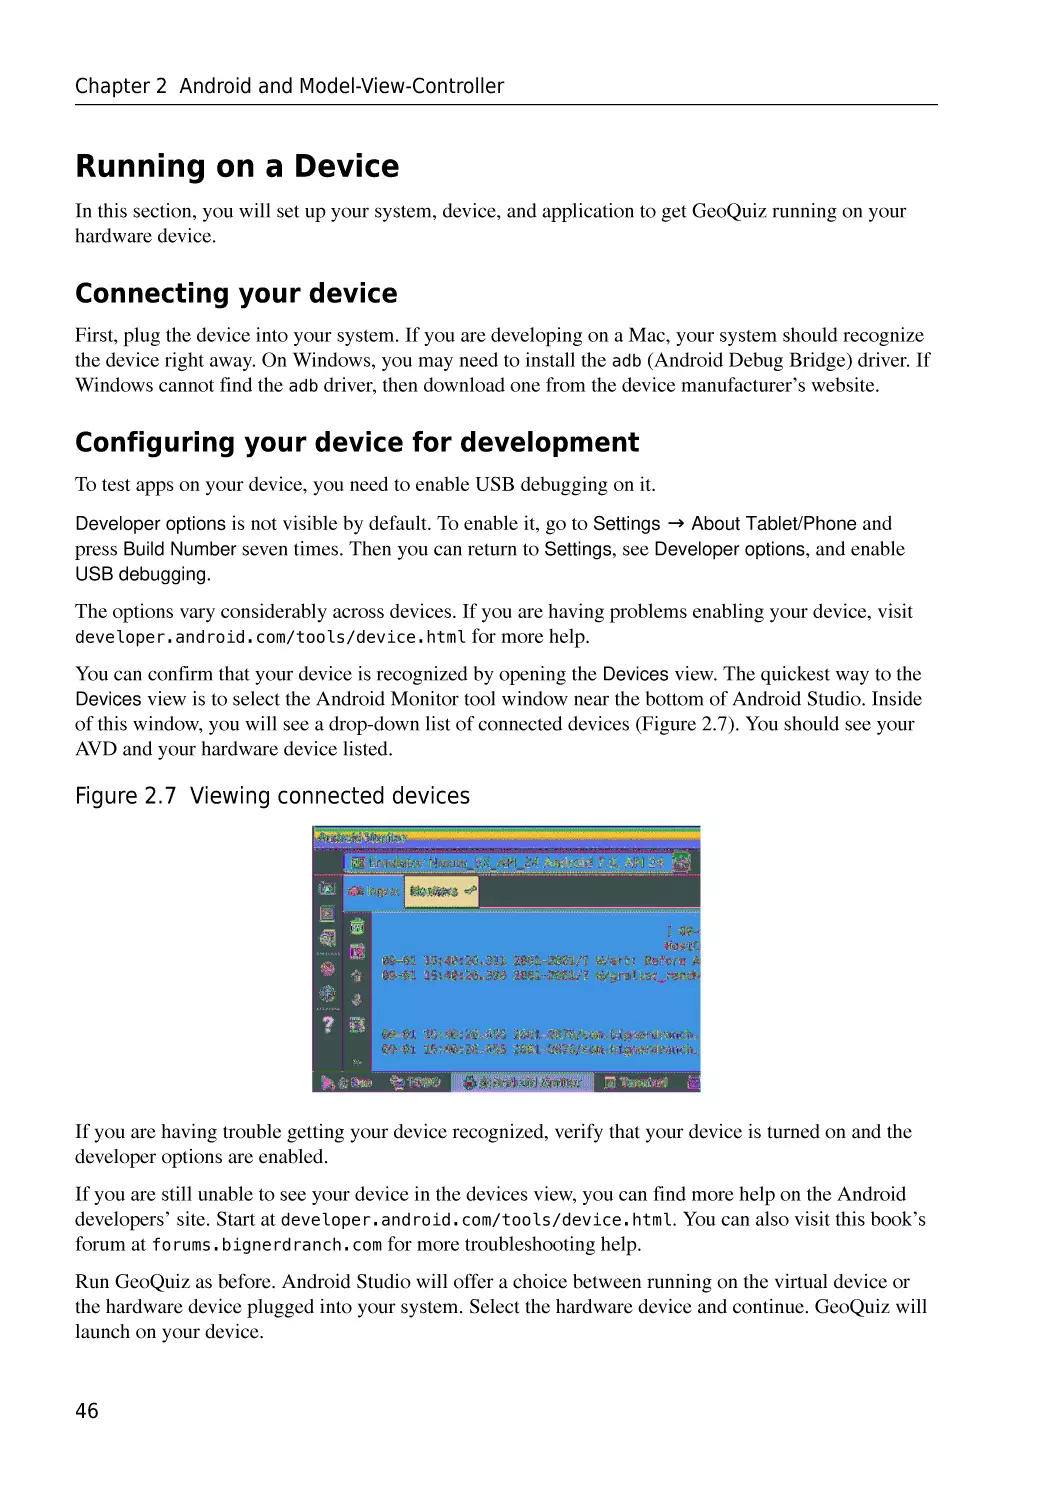 Running on a Device
Connecting your device
Configuring your device for development